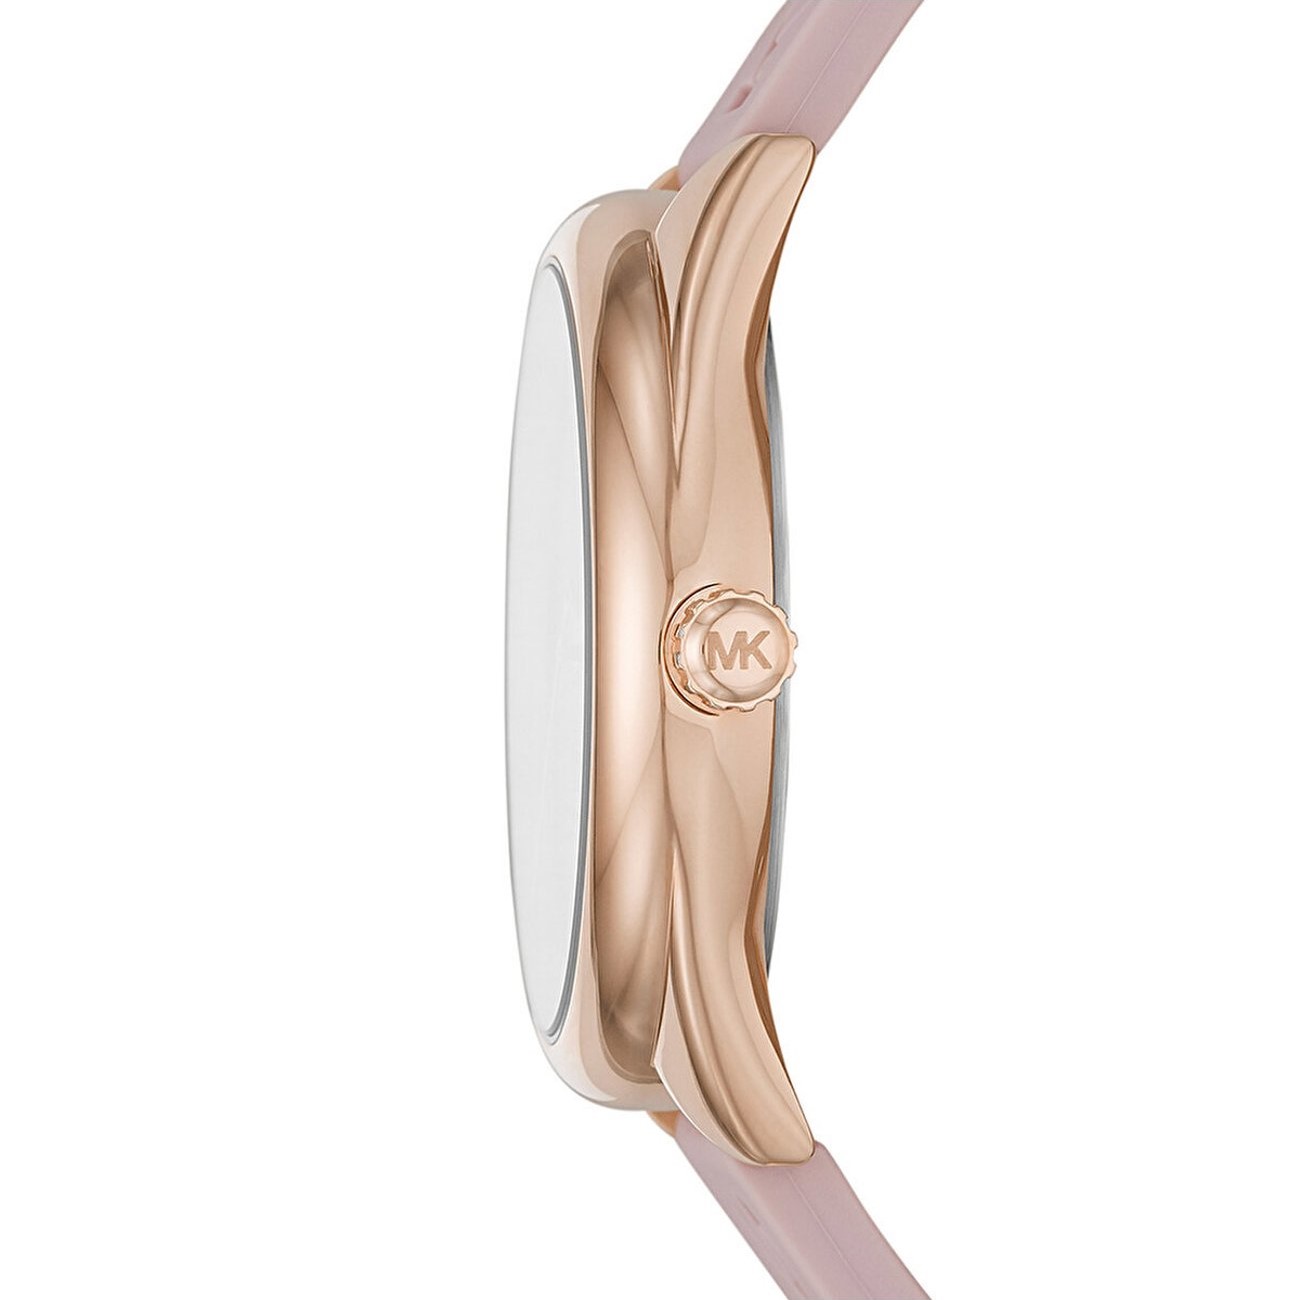 ĐỒNG HỒ ĐEO TAY NỮ MICHAEL KORS RUNWAY JANELLE ROSE GOLD PINK SILICONE WATCH MK7139 6